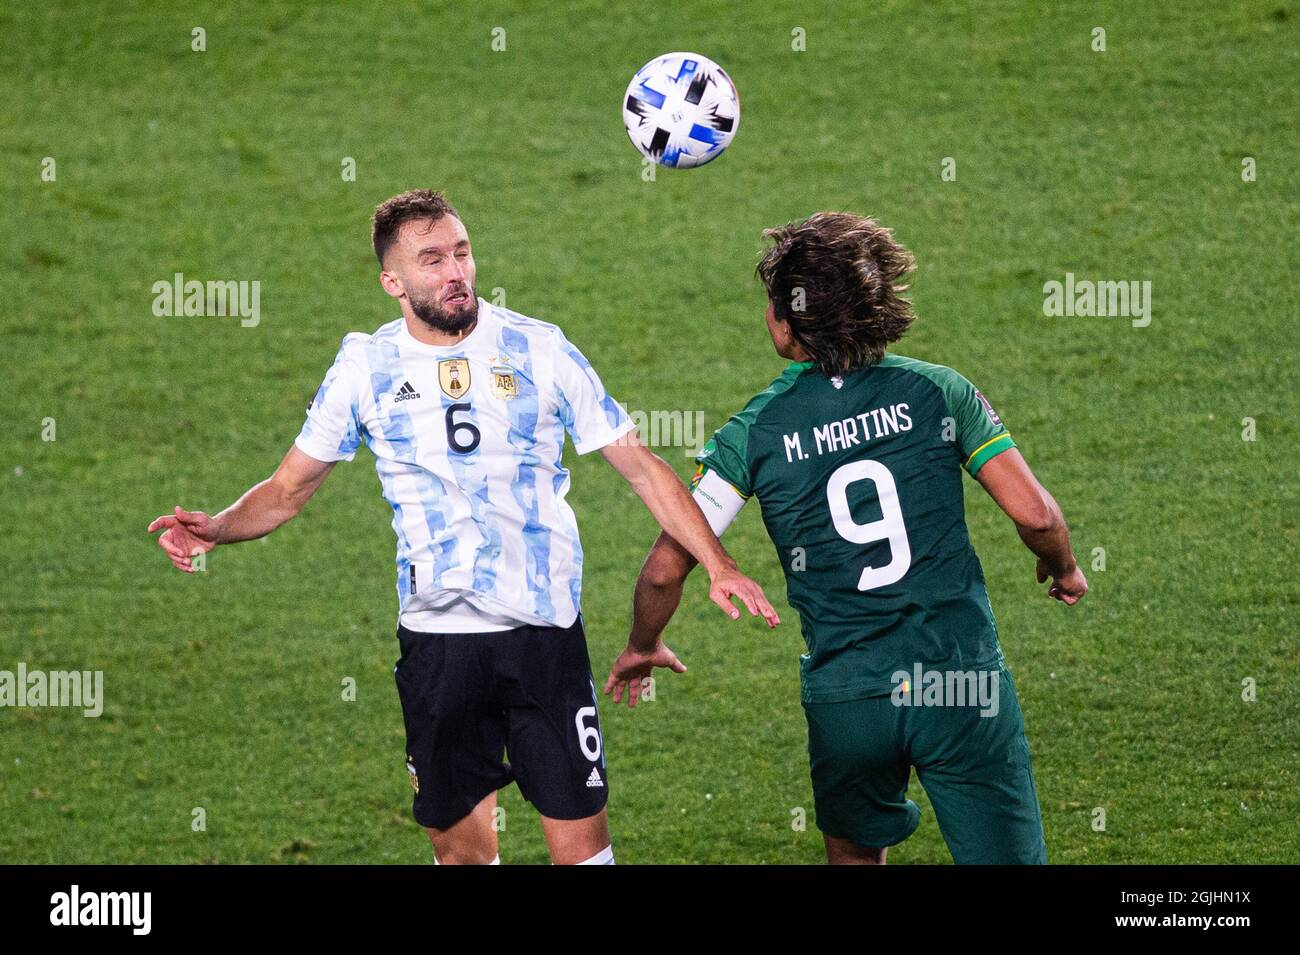 Buenos Aires, Argentina. 09th Sep, 2021. German Pezzella of Argentina and Marcelo Moreno Martins of Bolivia are seen in action during a qualifying soccer match Between Argentina and Bolivia for the FIFA World Cup Qatar 2022 in Buenos Aires. (Final score; Argentina 3:0 Bolivia) Credit: SOPA Images Limited/Alamy Live News Stock Photo